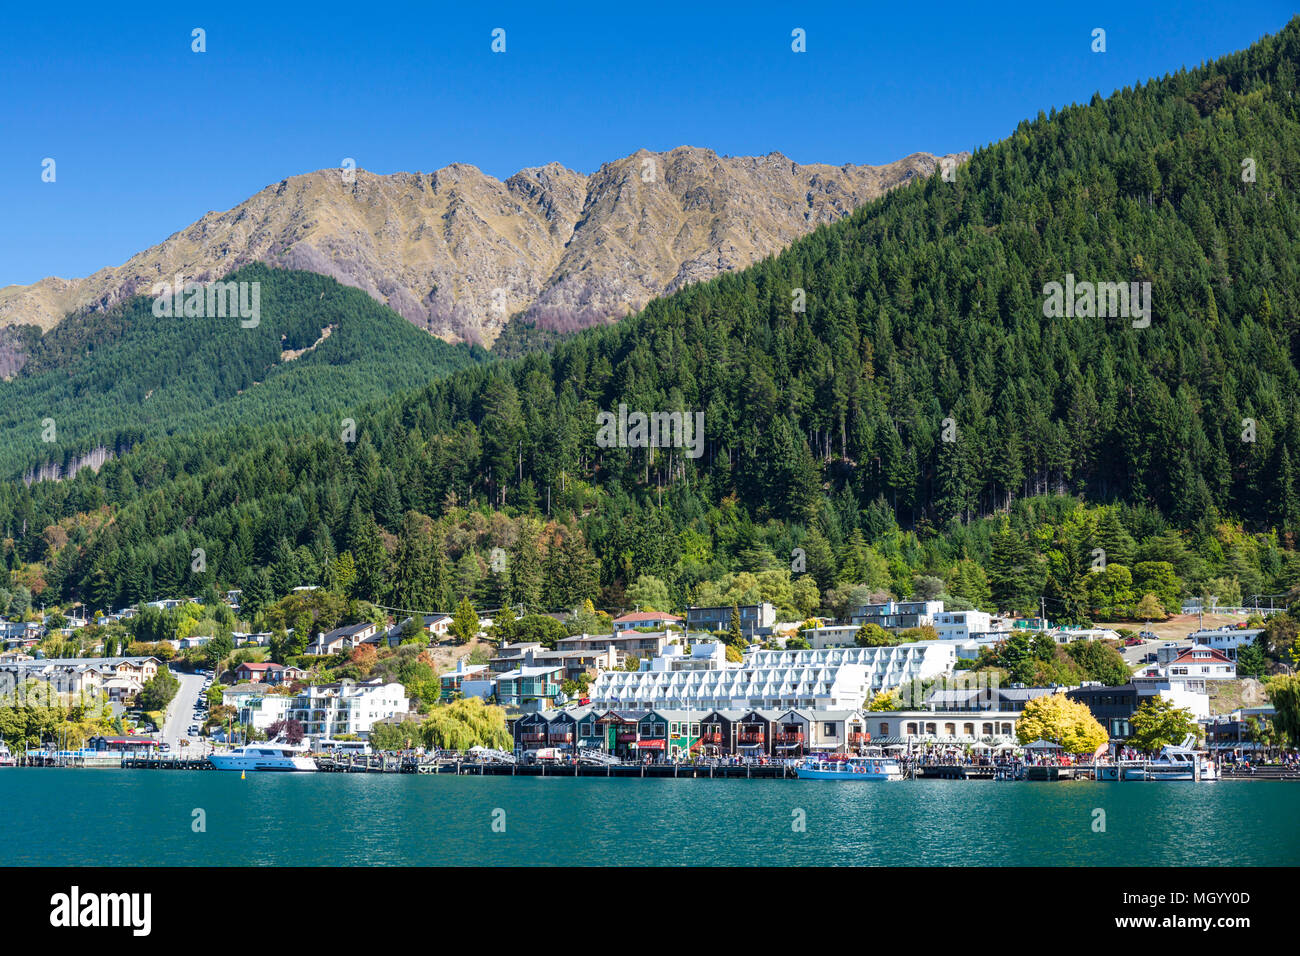 Queenstown South Island new zealand view of hotels and businesses on lake esplanade queenstown the lakeside of Lake wakatipu queenstown nz Stock Photo